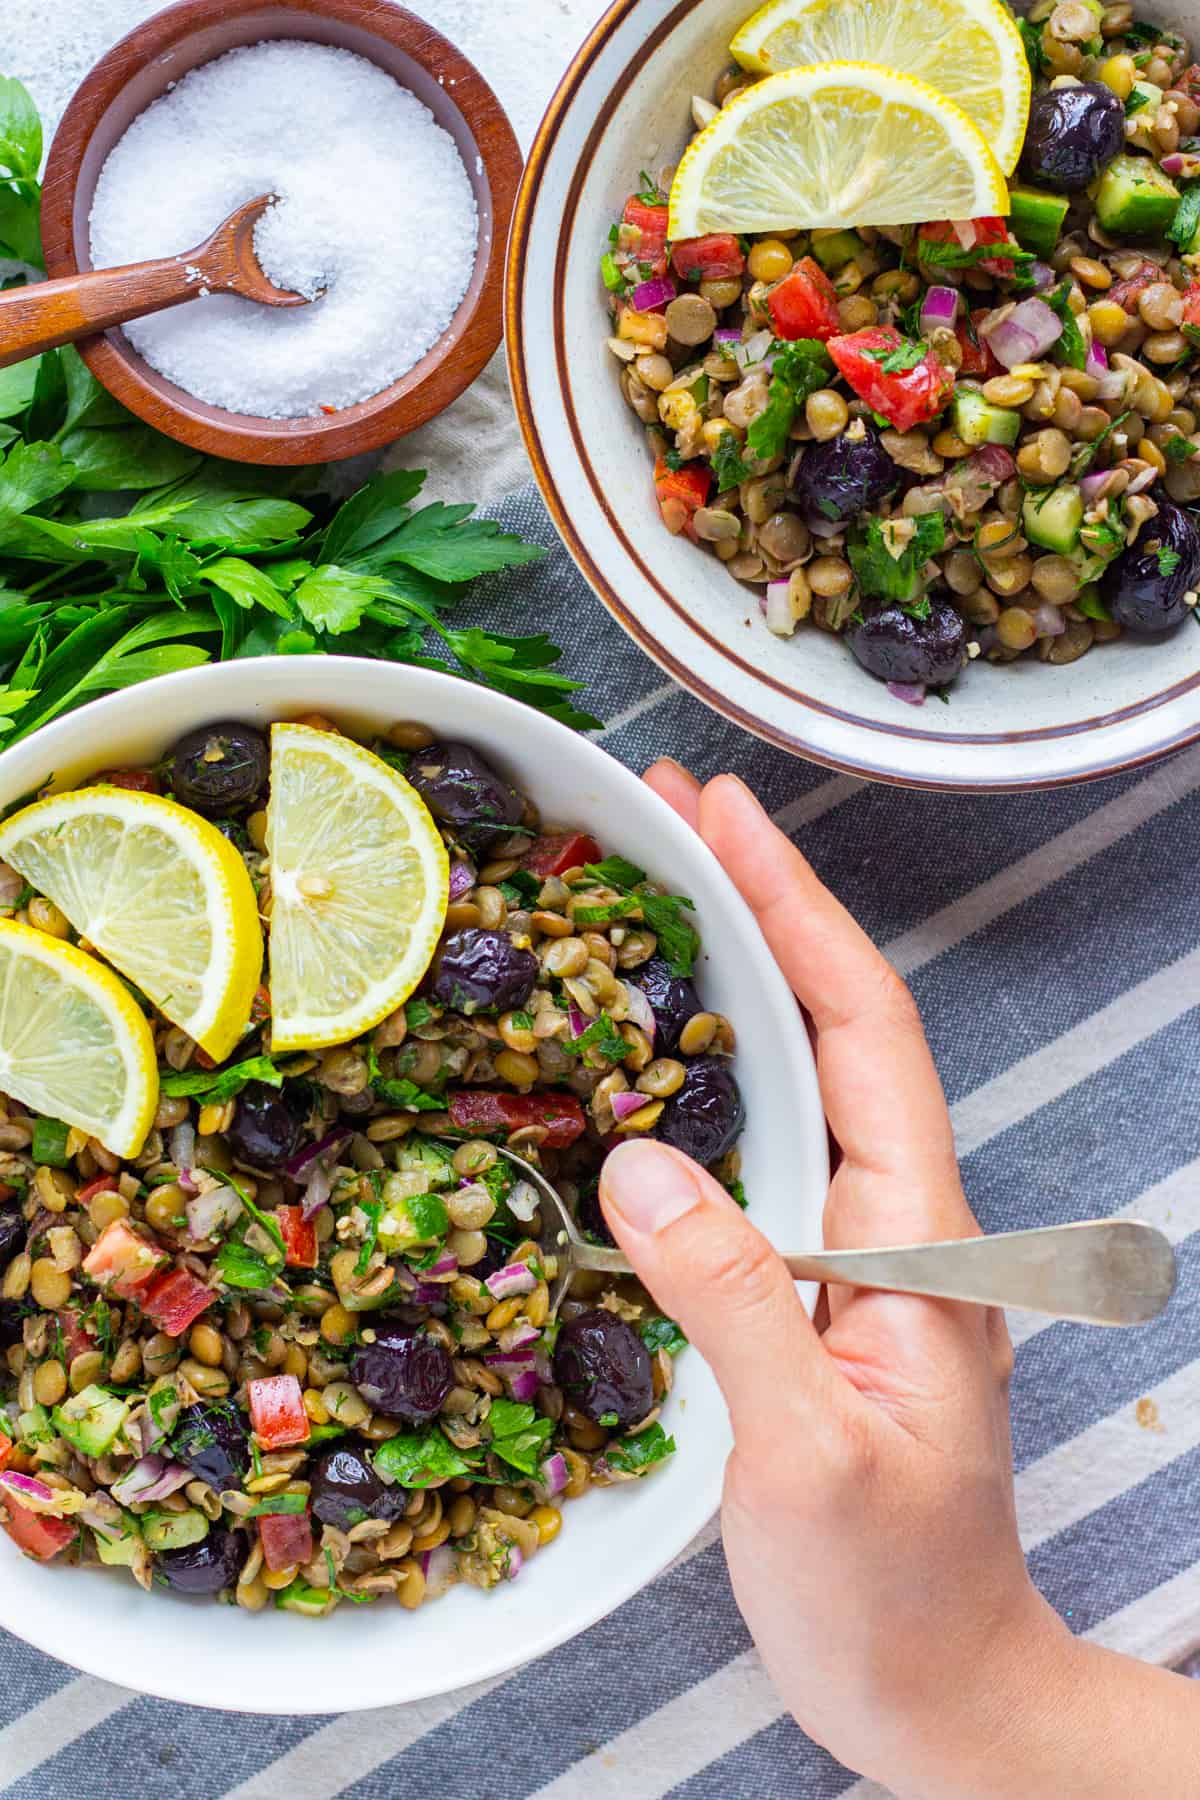 This Mediterranean lentil salad is a healthy salad that's very easy to make. Loaded with delicious vegetables, this vegetarian salad is perfect for lunch.